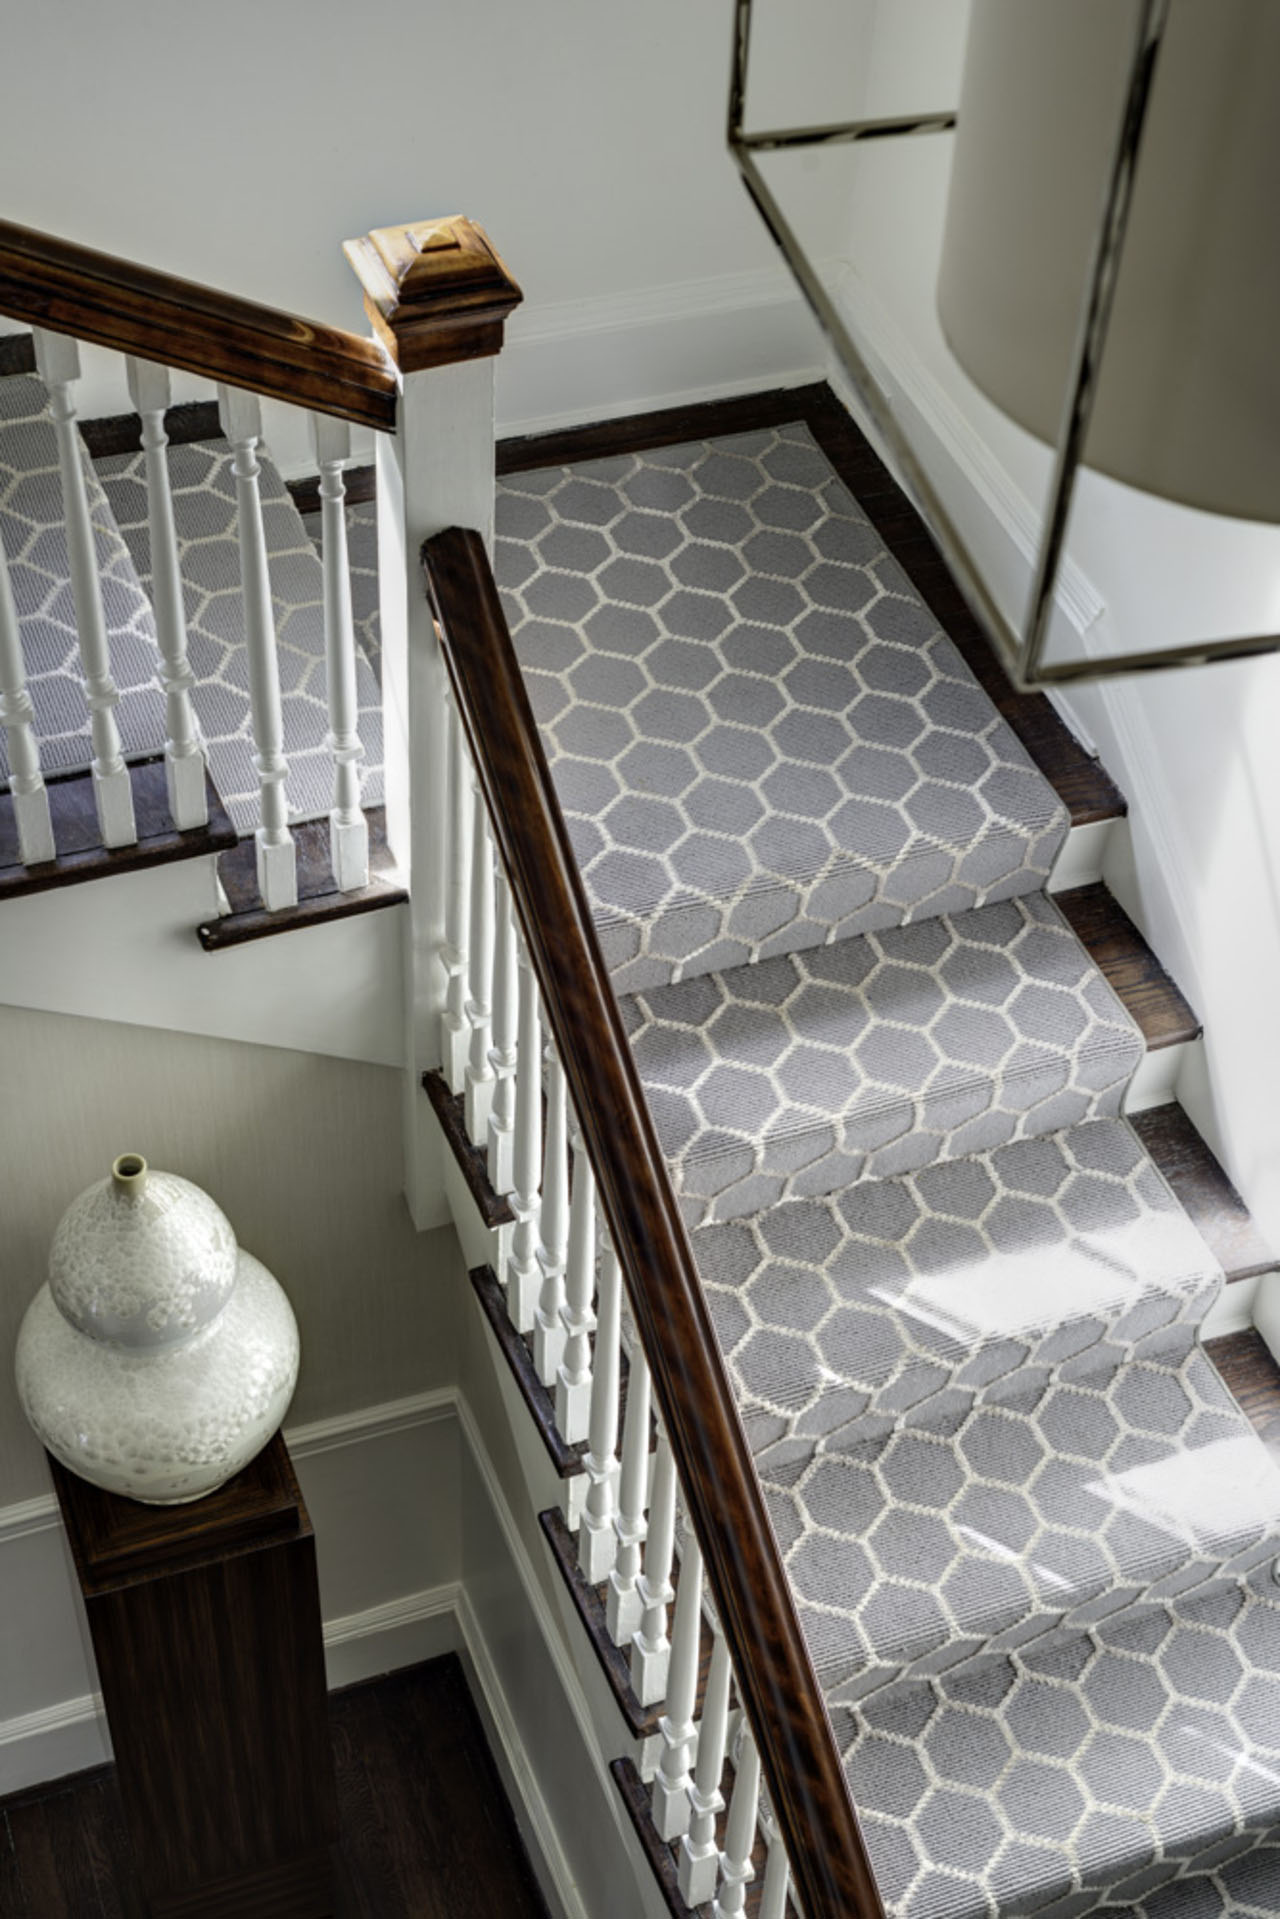 Avon Road Bhdm Classic Avon Road Residence By BHDM Staircase Idea Involving Hexagon Patterned Carpet Covering Wooden Steps Dream Homes Classic Living Room Style For The Stylish Home Appearance